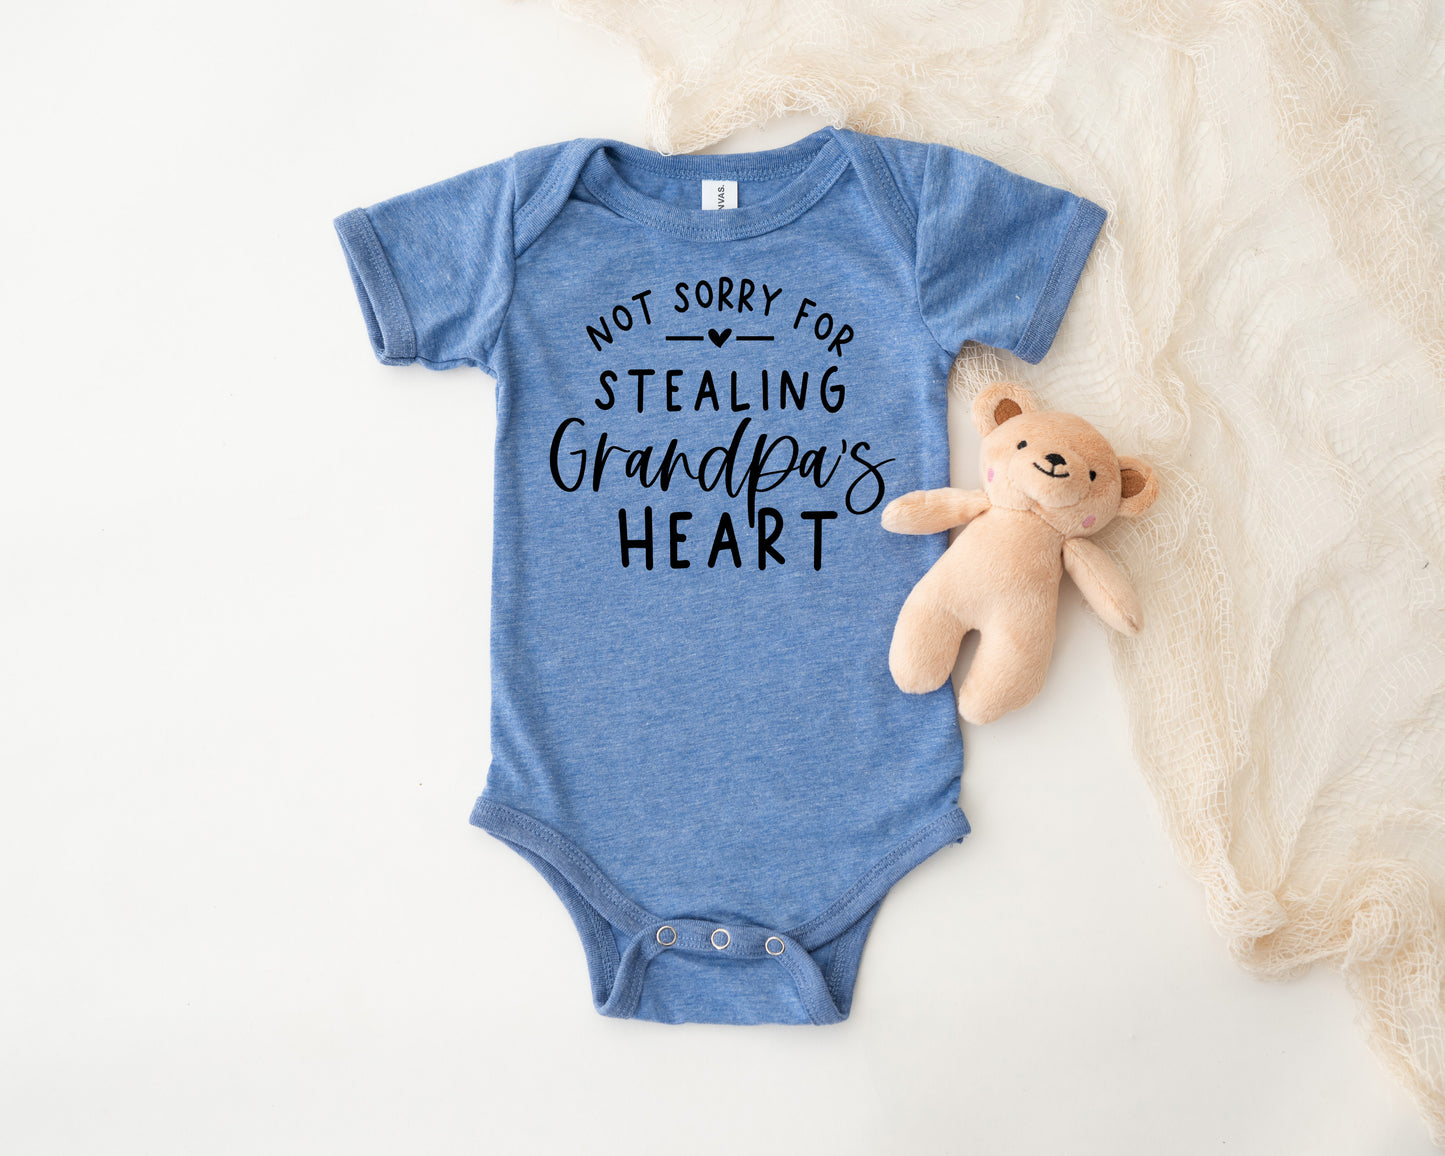 Not Sorry For Stealing Grandpa's Heart Onesie®